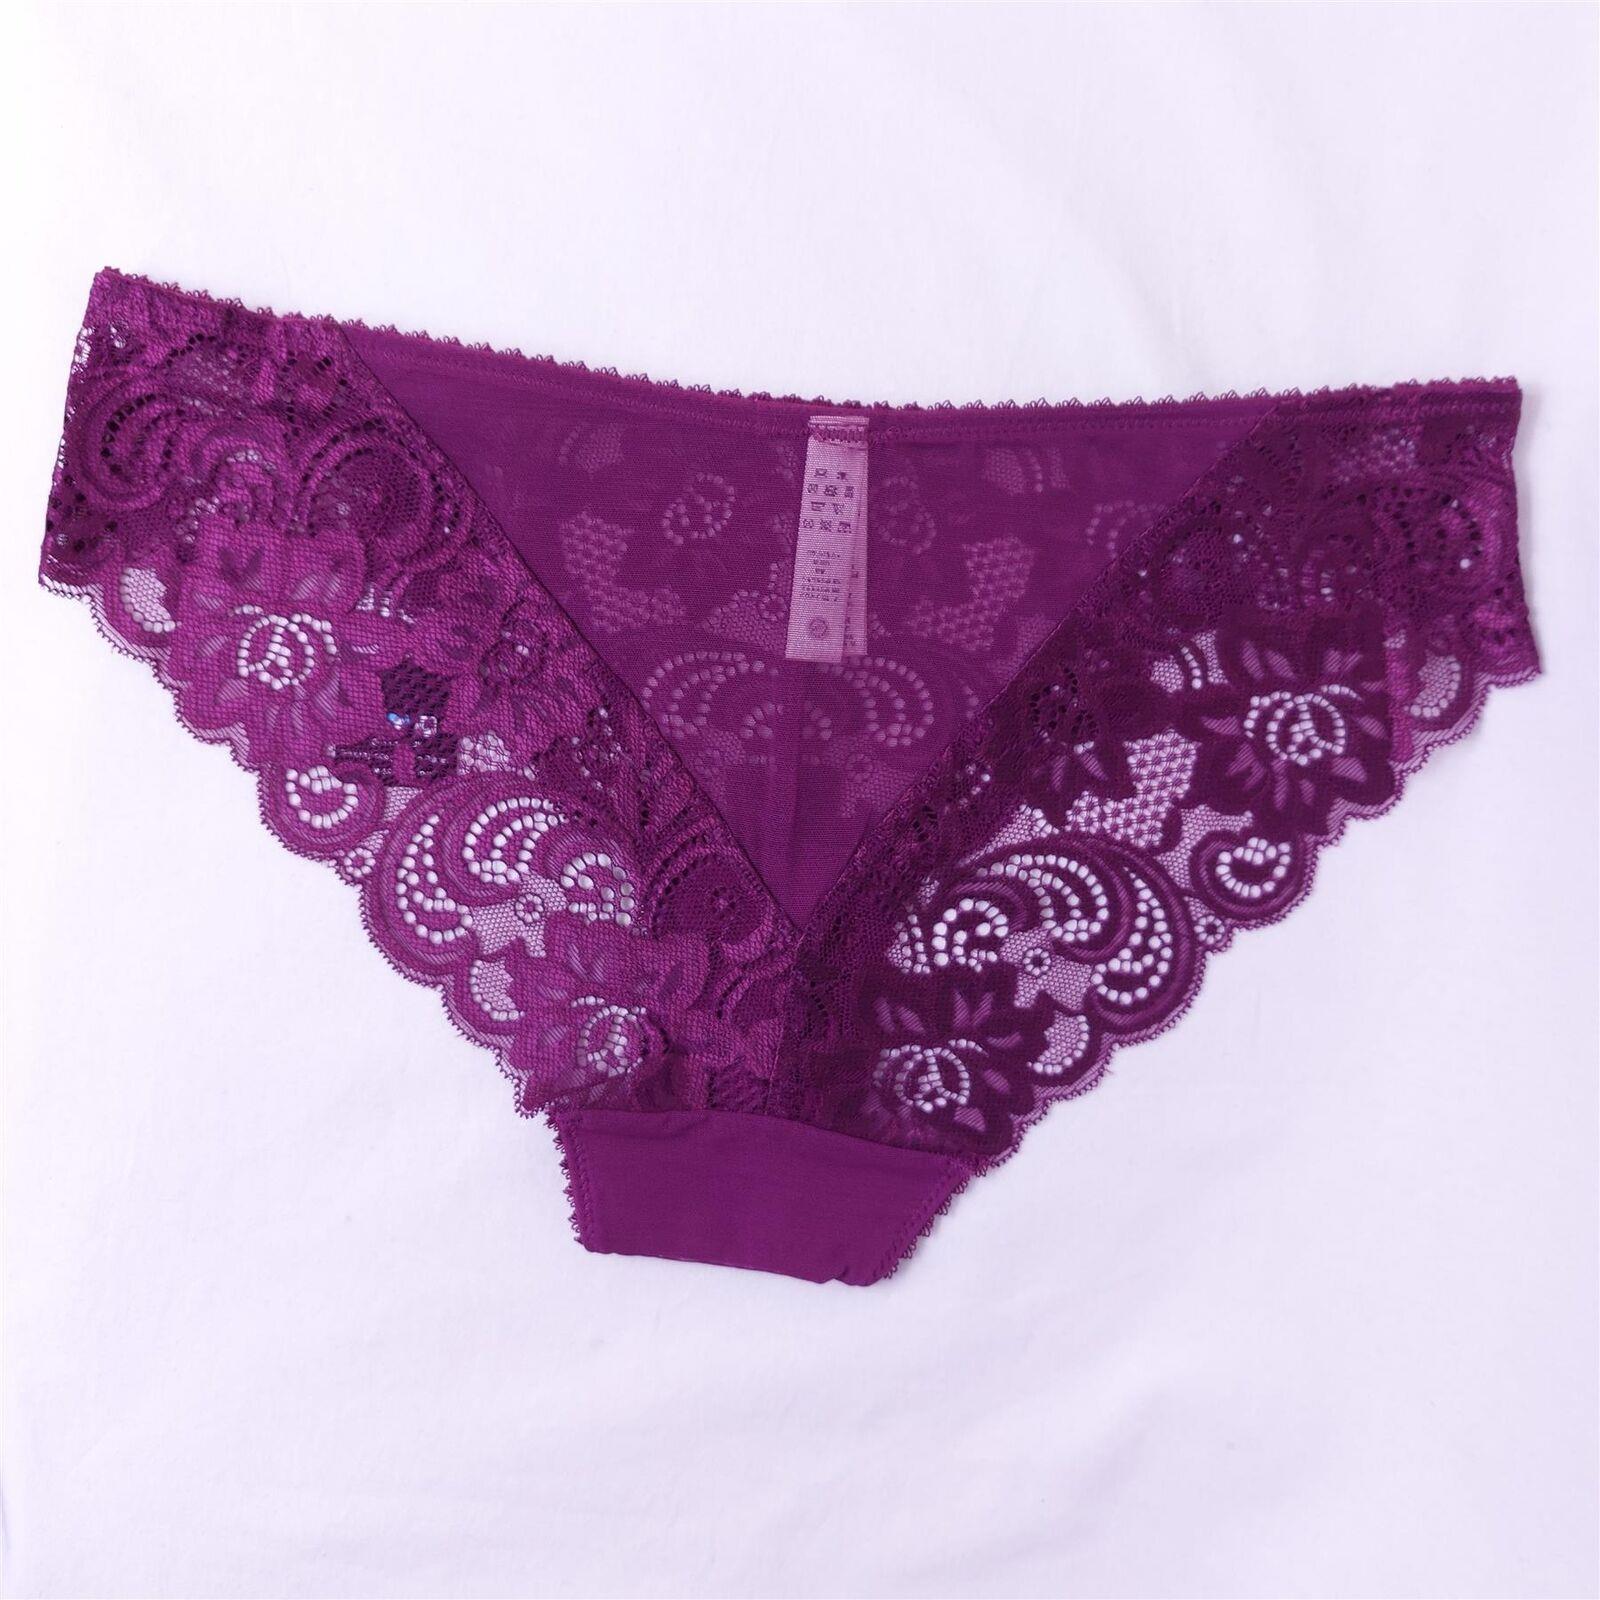 2-Pack Gossard Lace Brief Knickers Multipack Size 8-10 Purple